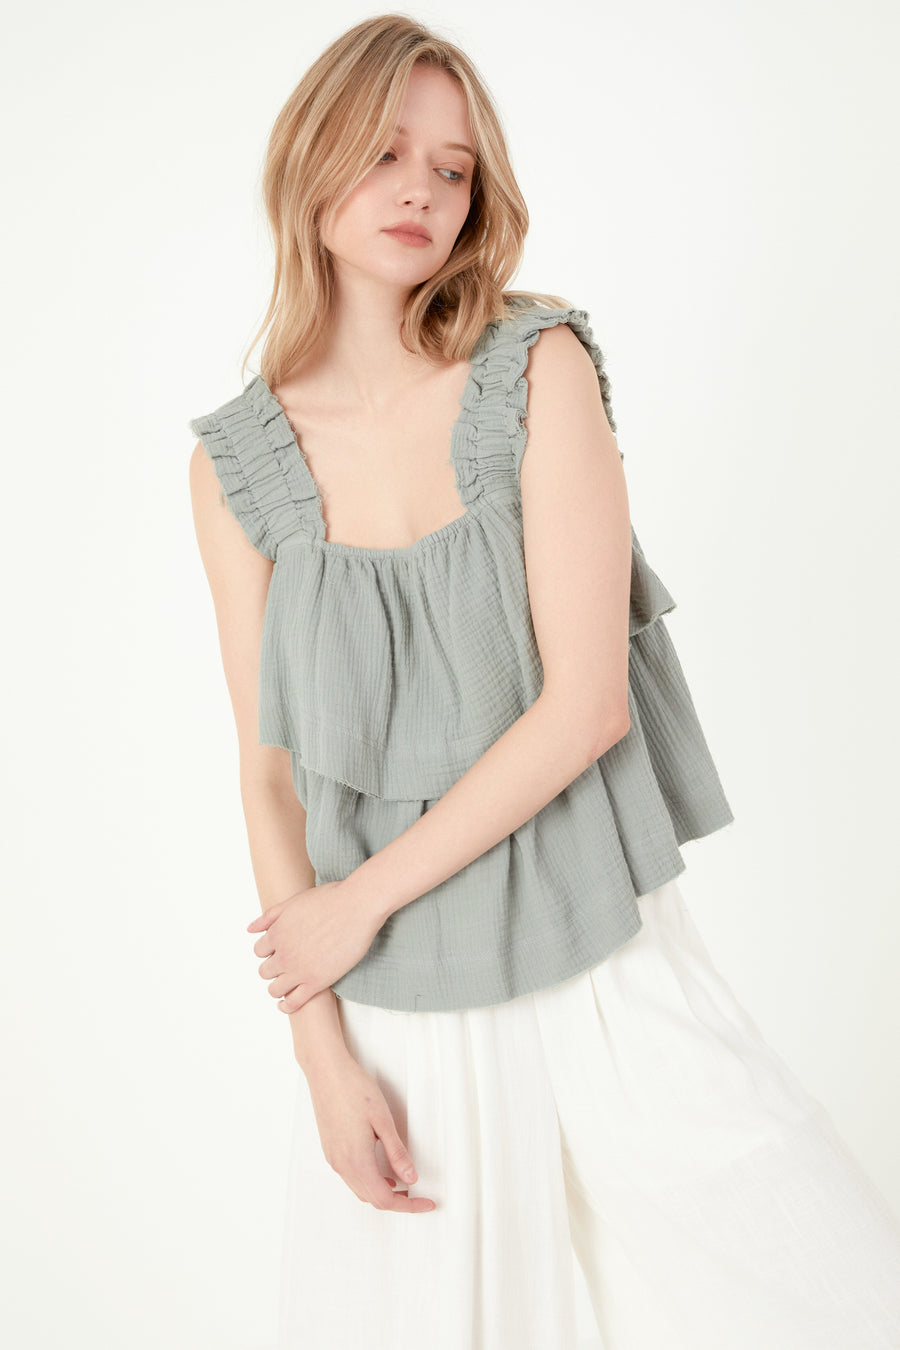 Ruffled Straps with Tiered Top